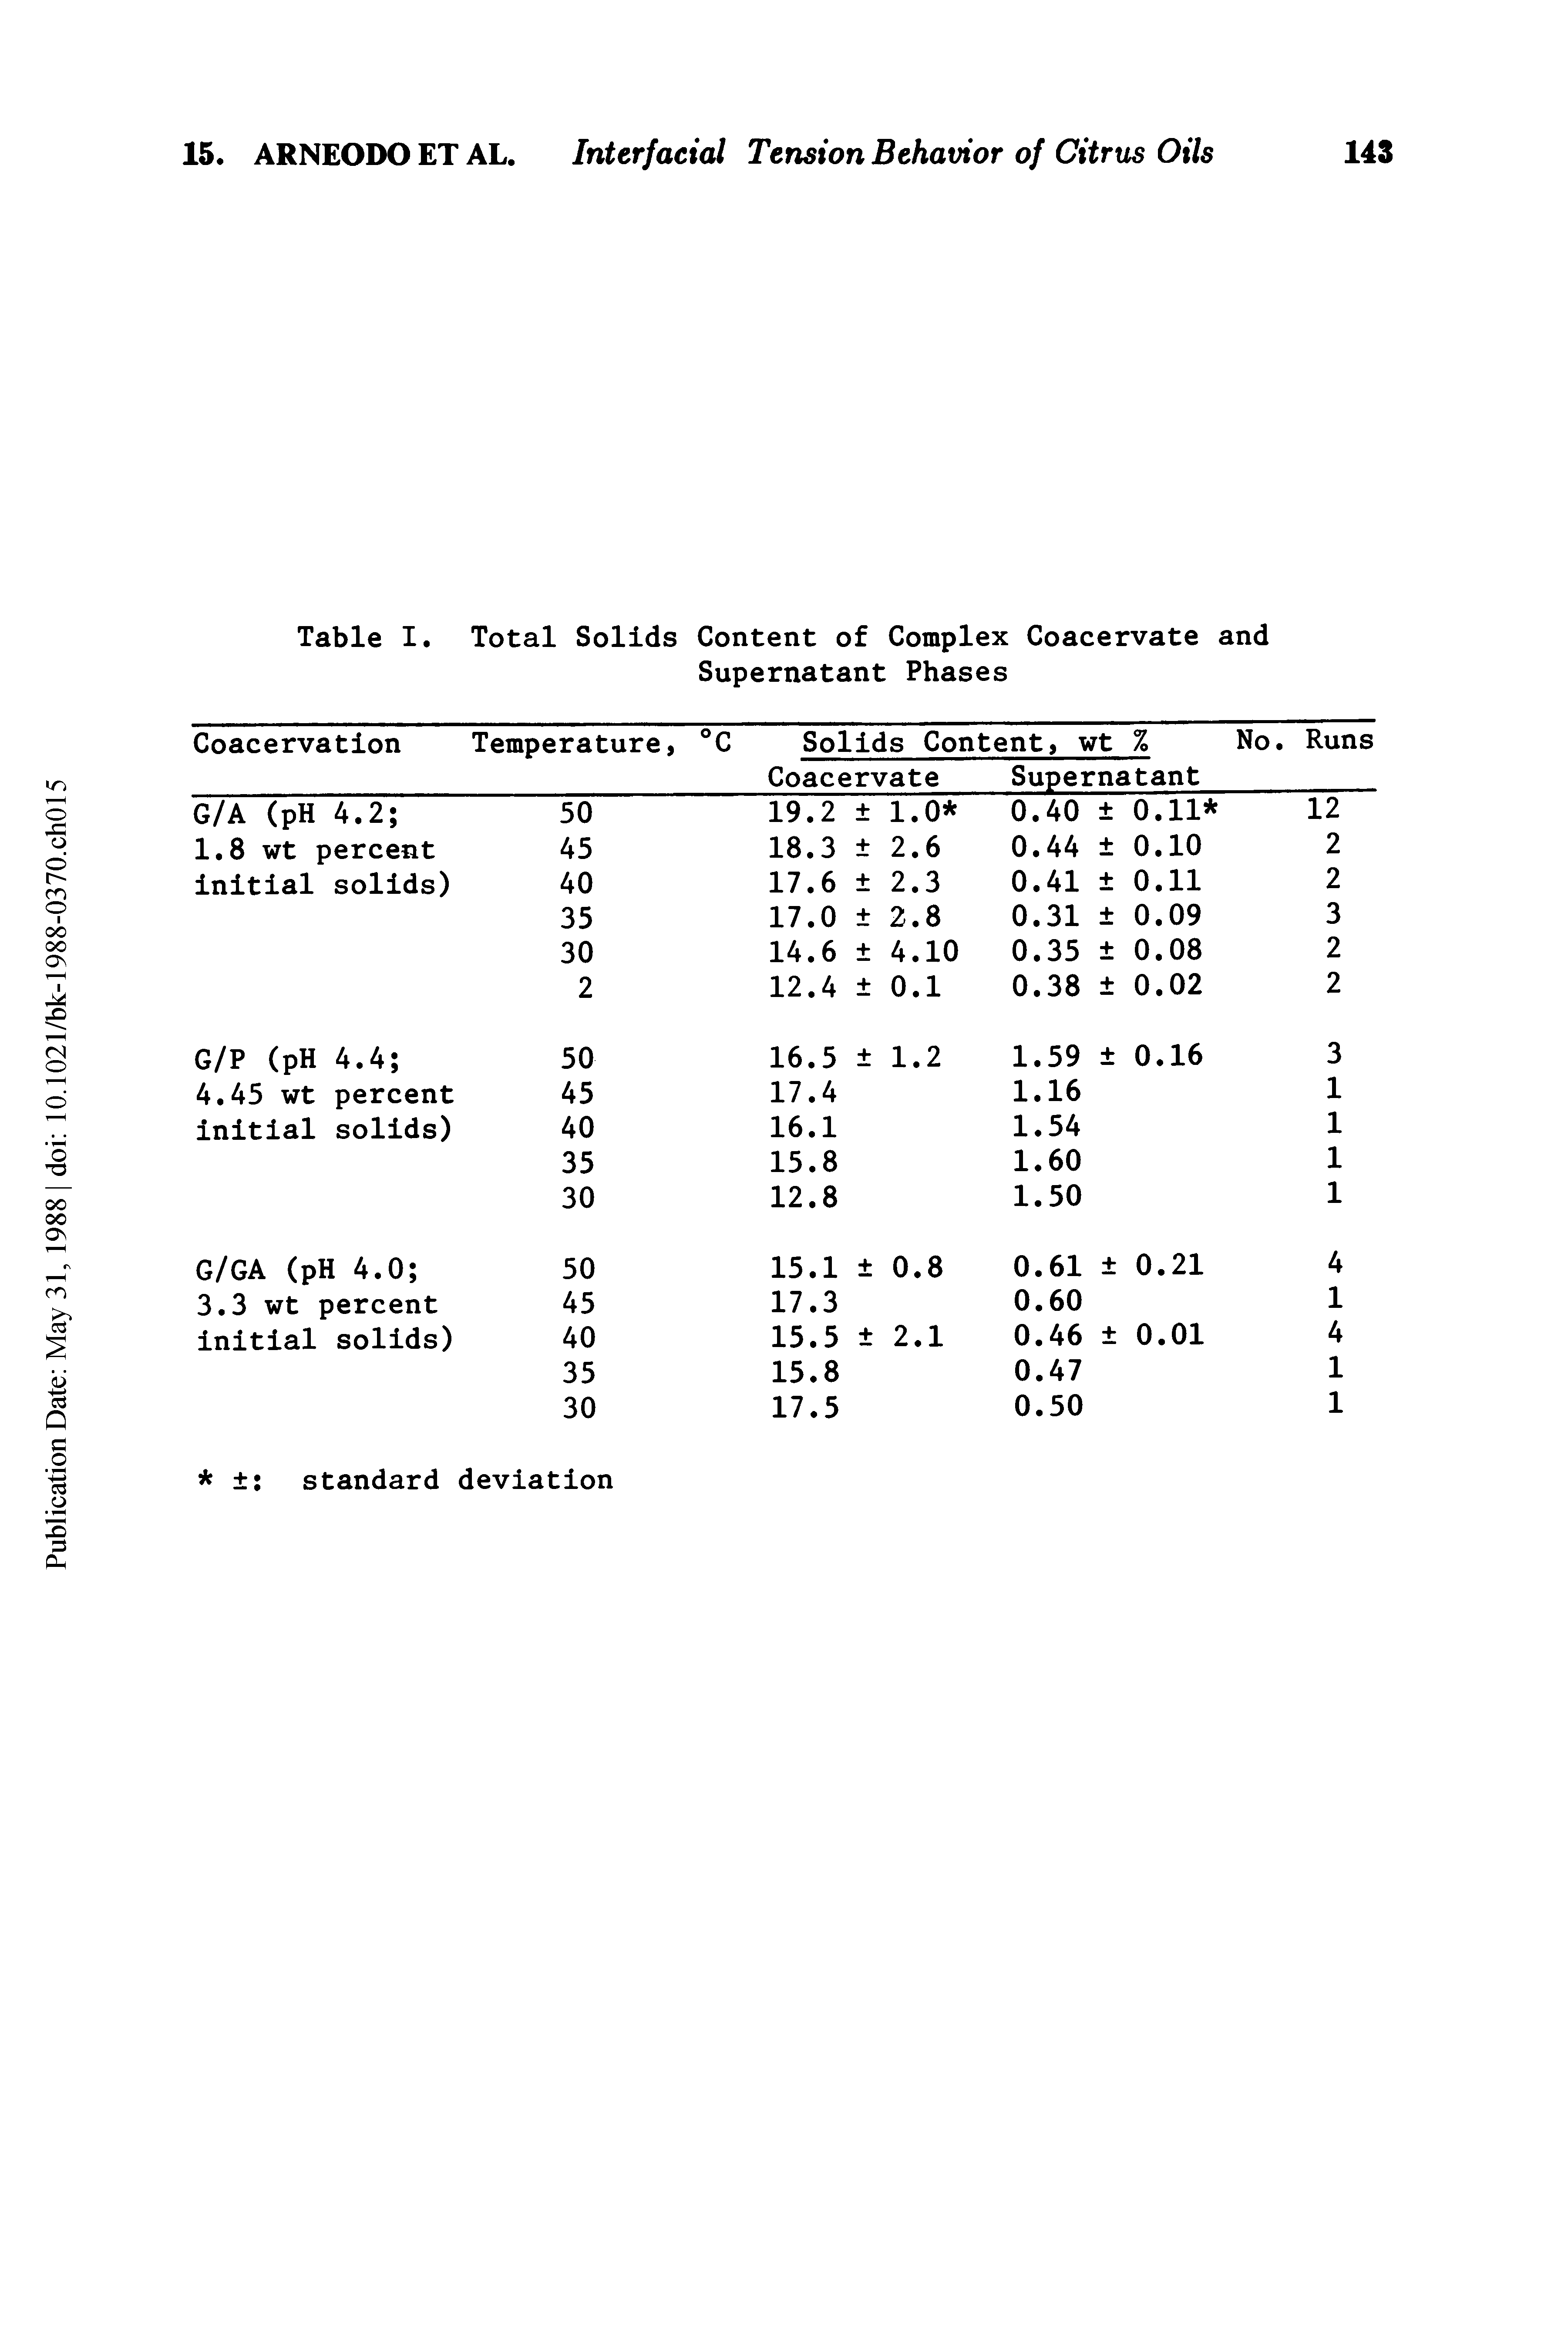 Table I. Total Solids Content of Complex Coacervate and Supernatant Phases...